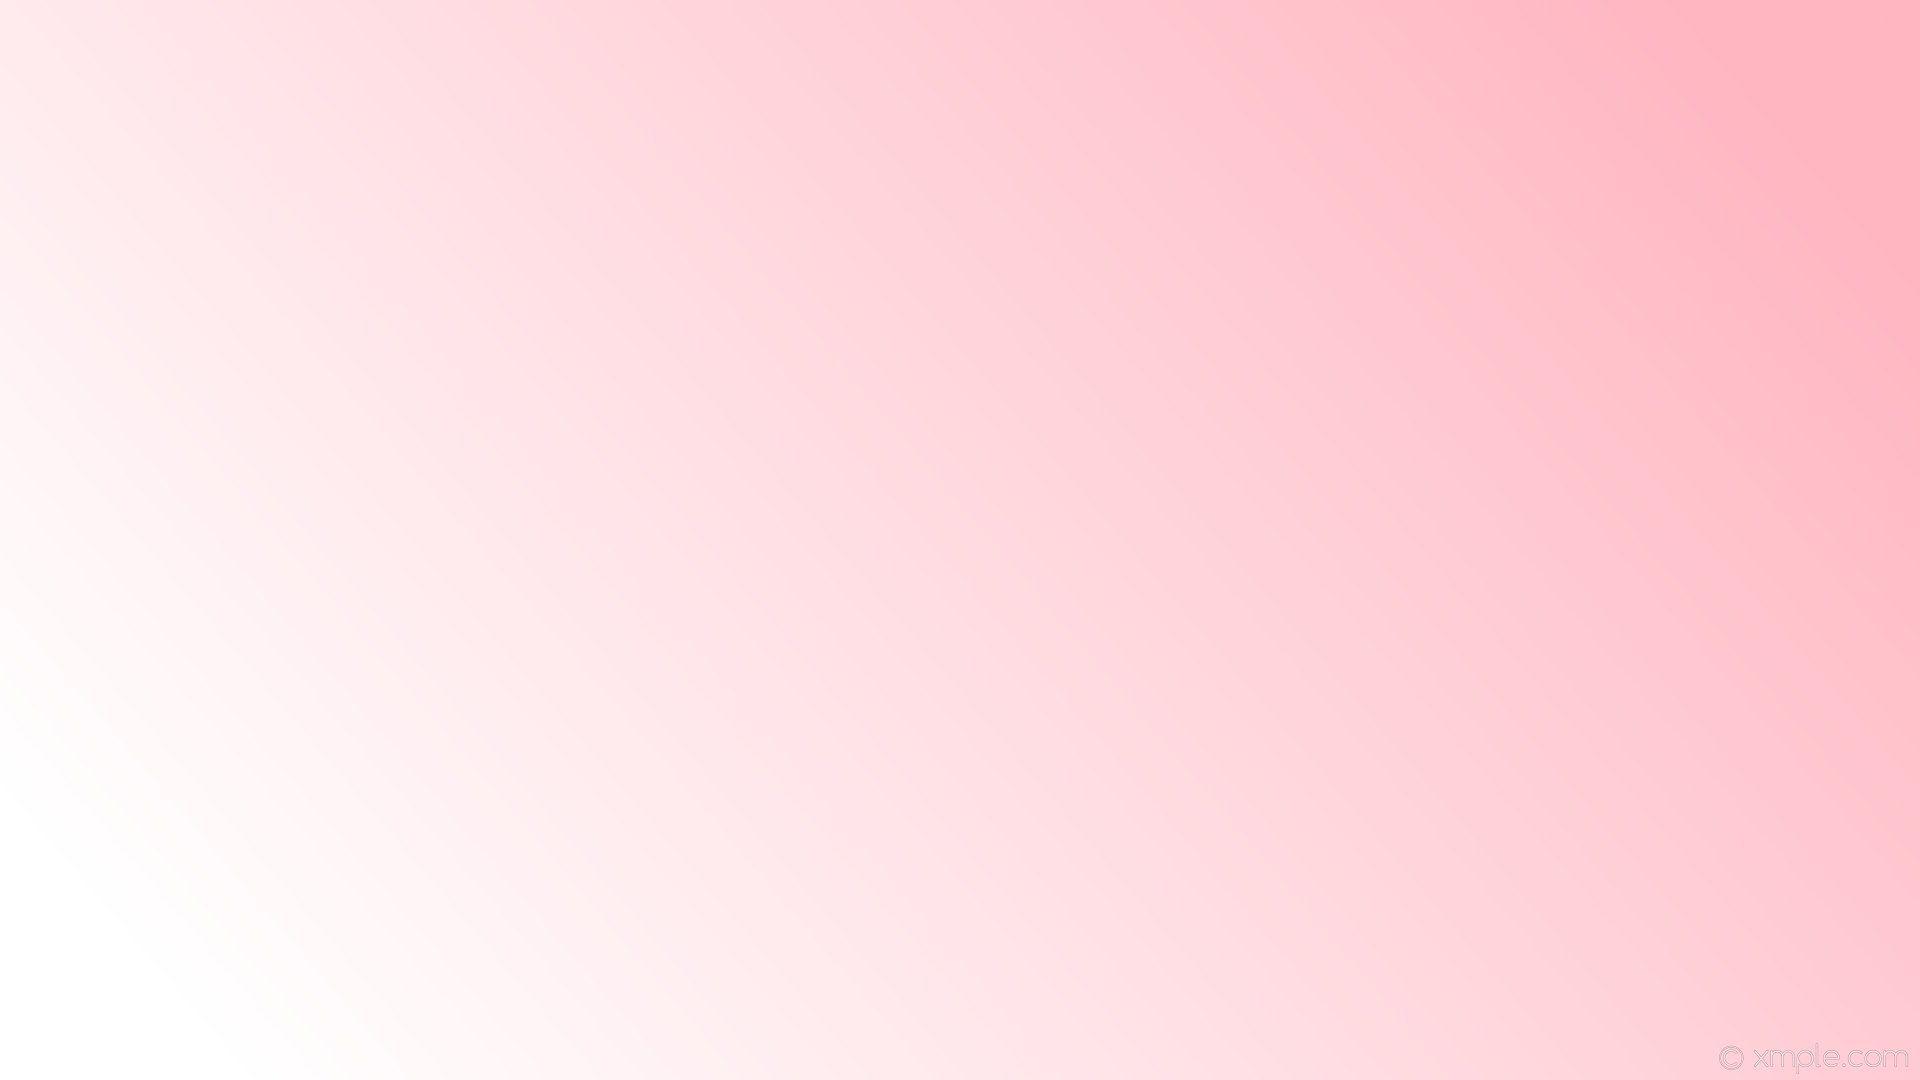 Blue and Pink Hair Pastel Backgrounds - wide 1